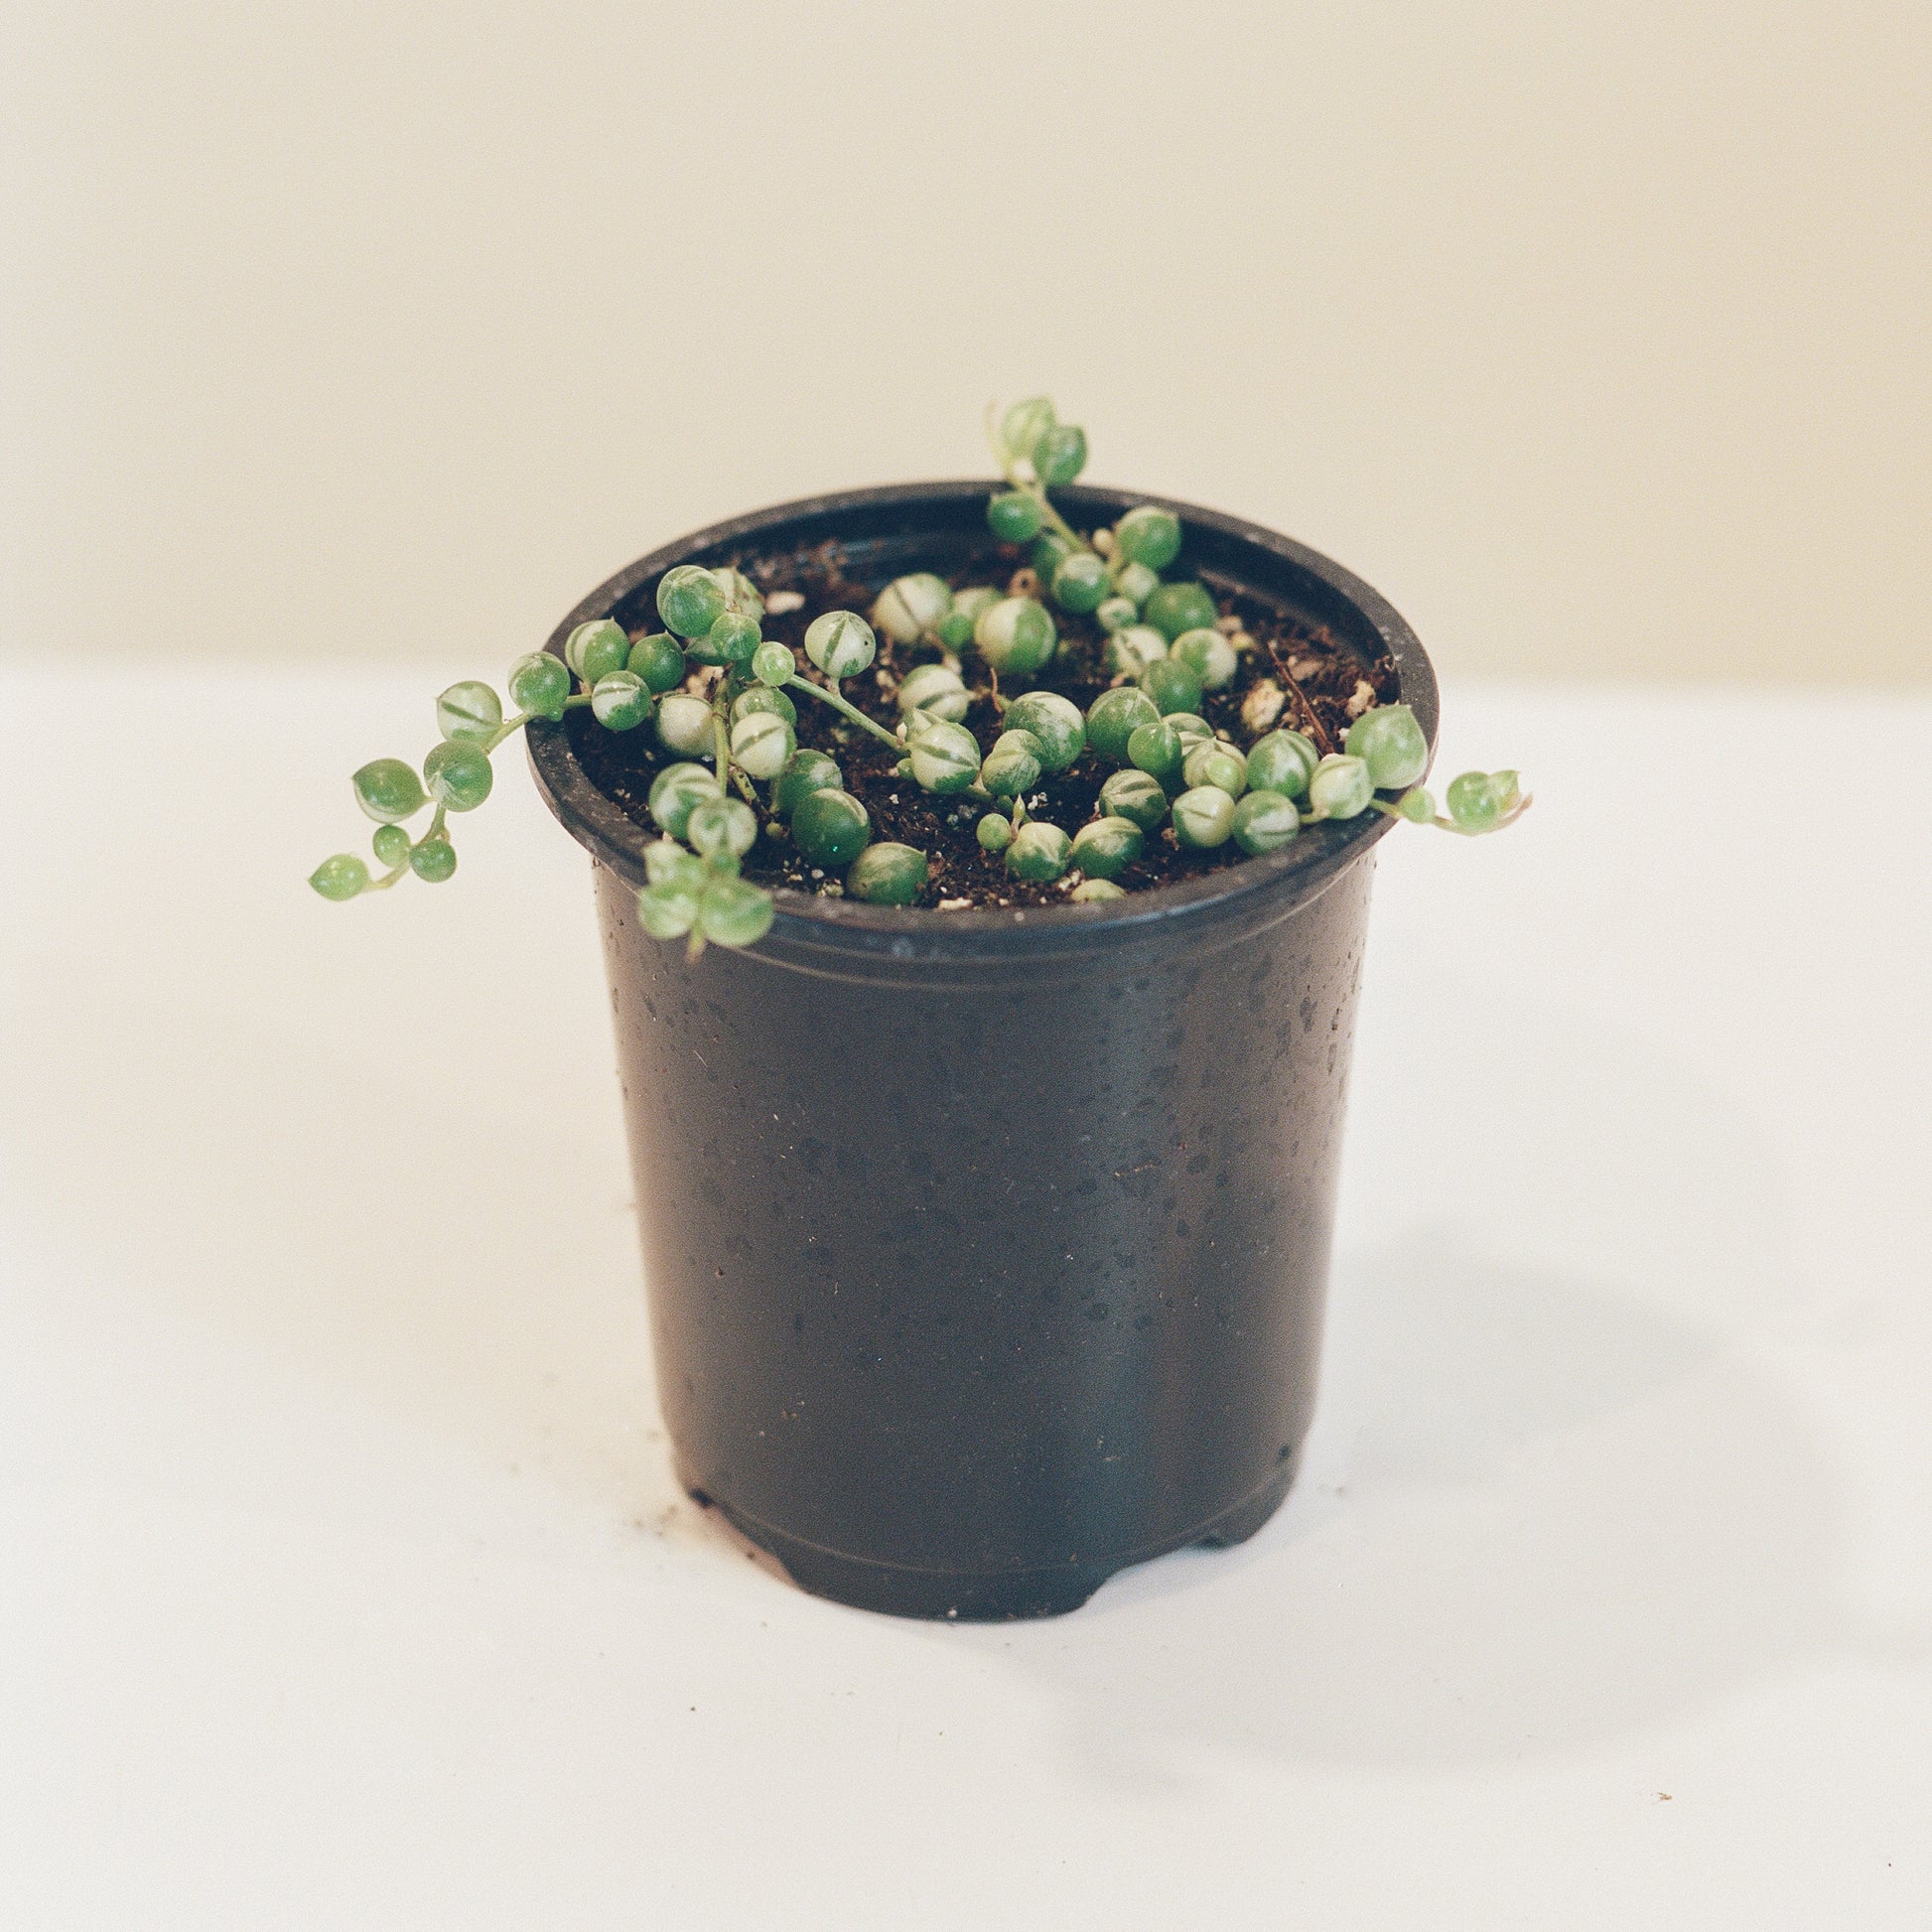 Variegated String of Pearls (Curio rowleyanus 'Variegata') in a 4 inch pot. Indoor plant for sale by Promise Supply for delivery and pickup in Toronto